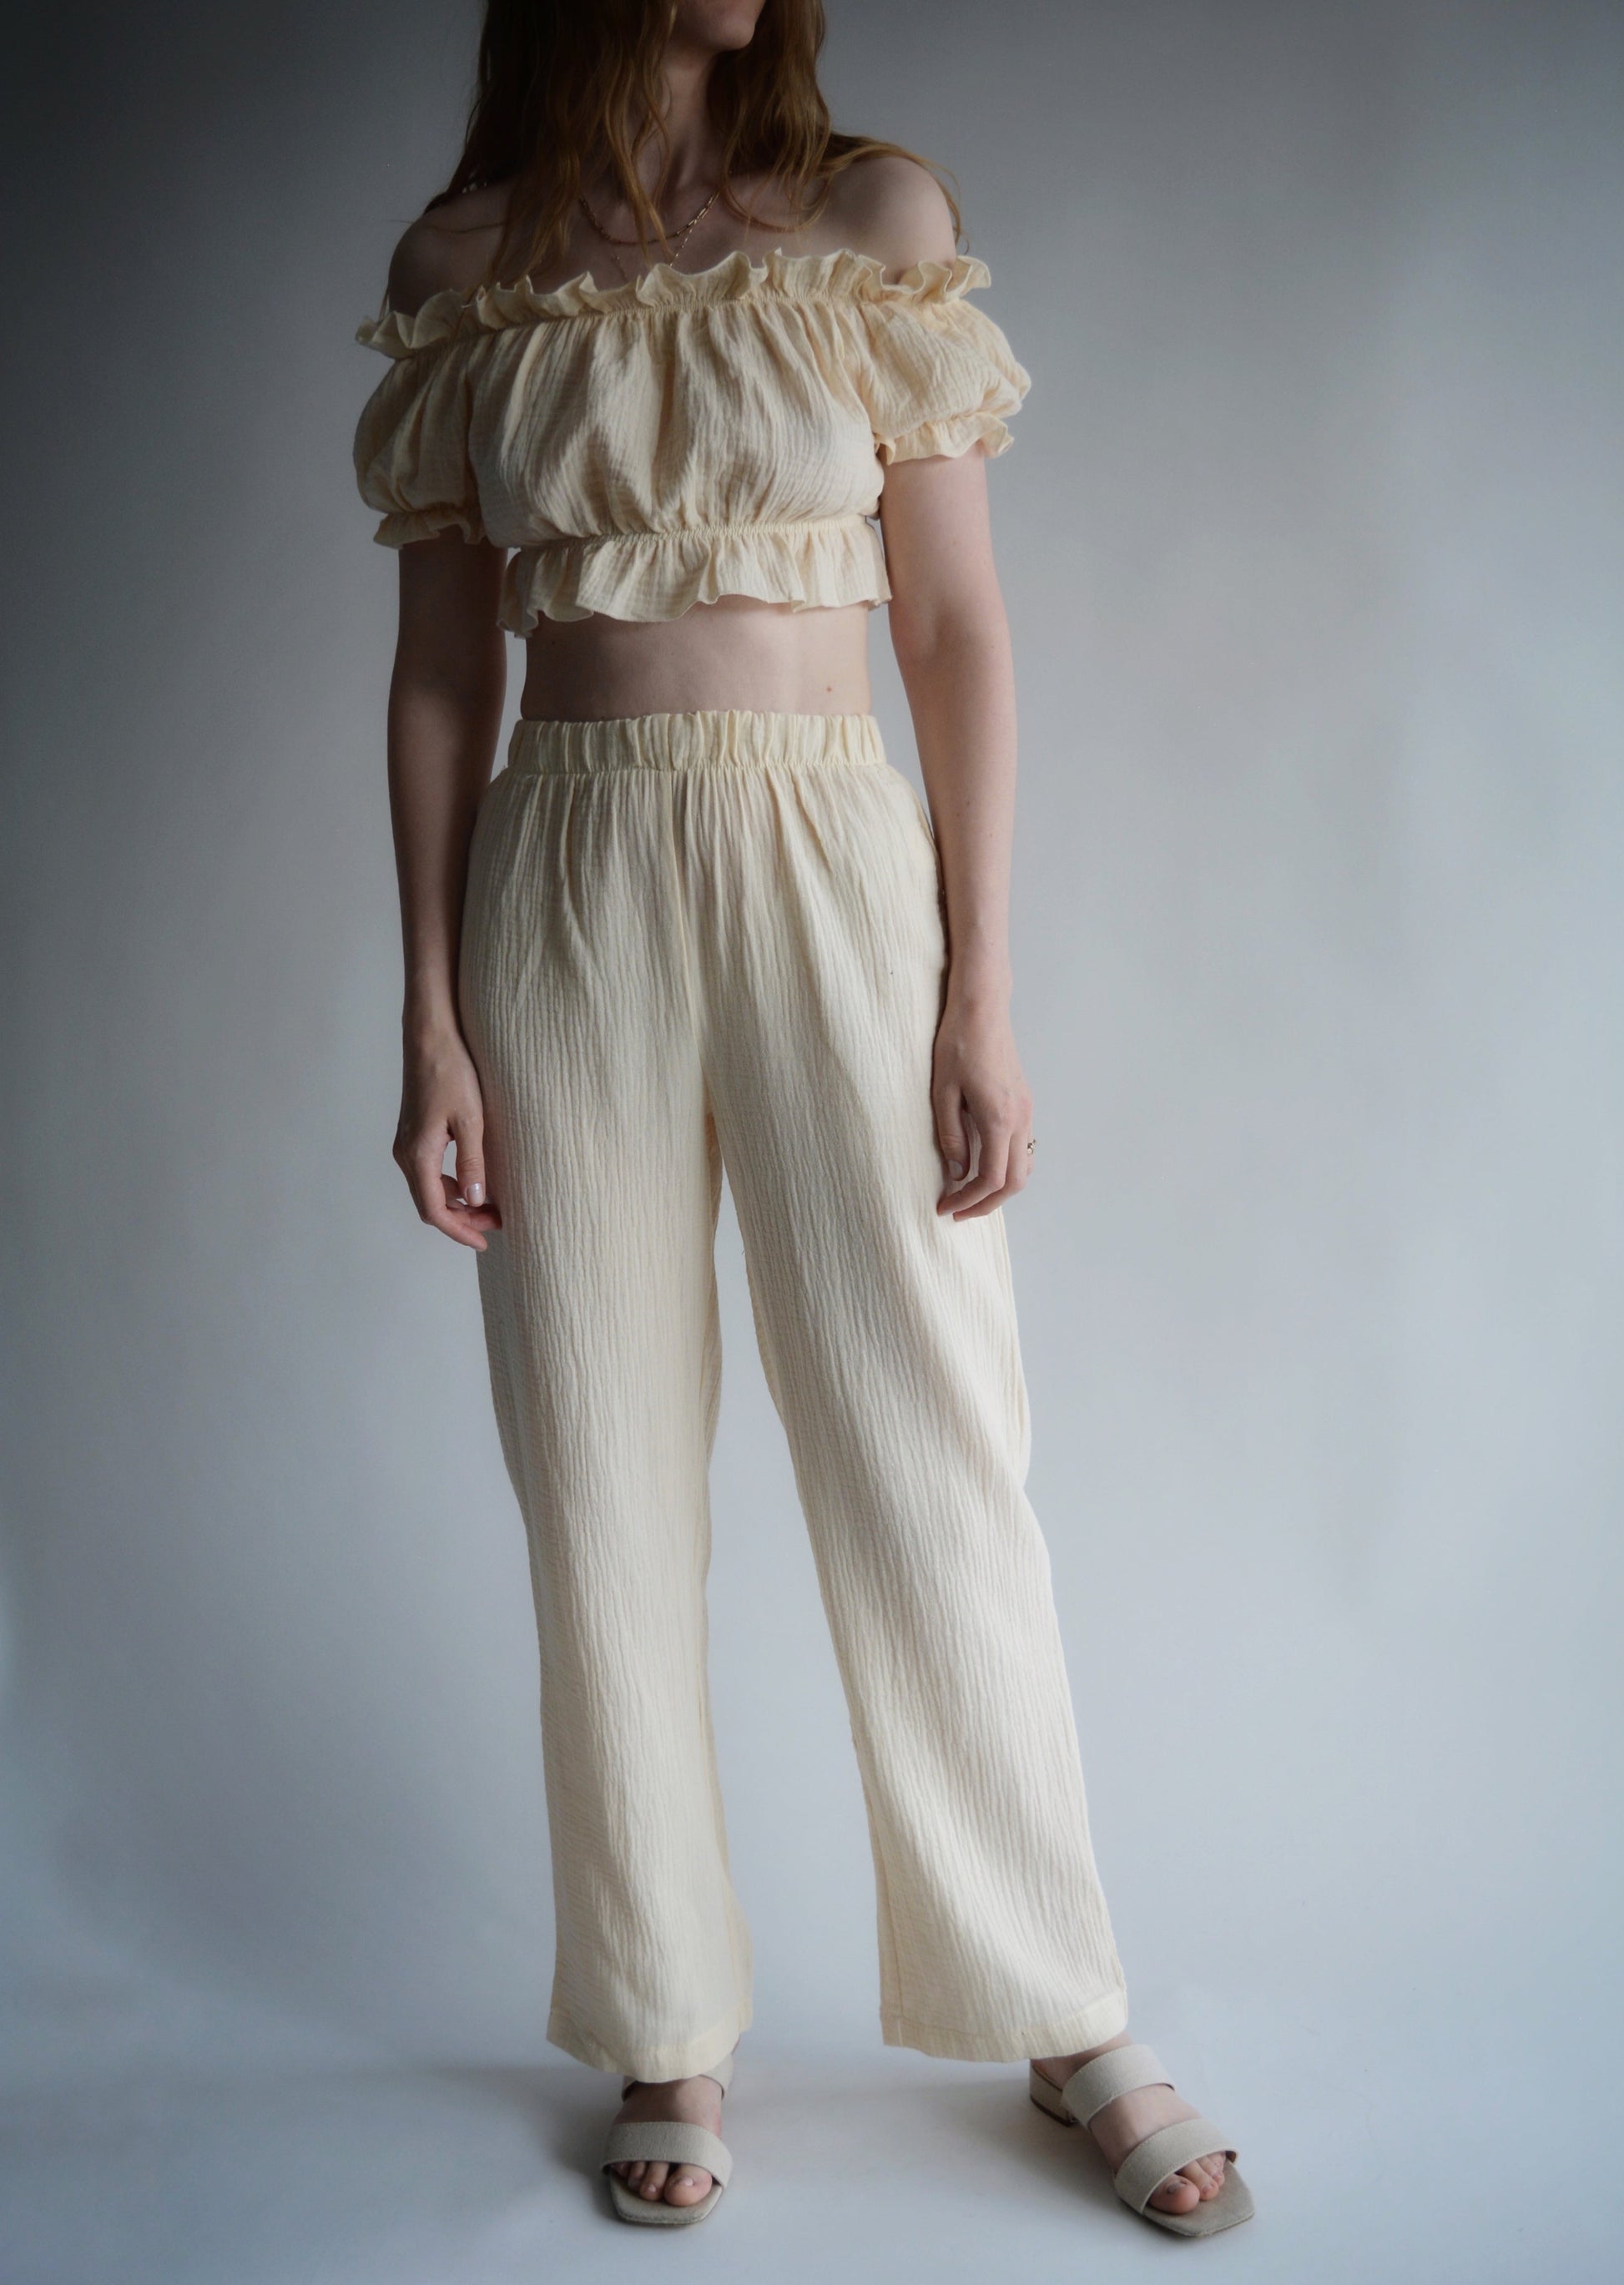 Cotton Muslin  Two-Piece Set: Crop Top and Pants in Ivory